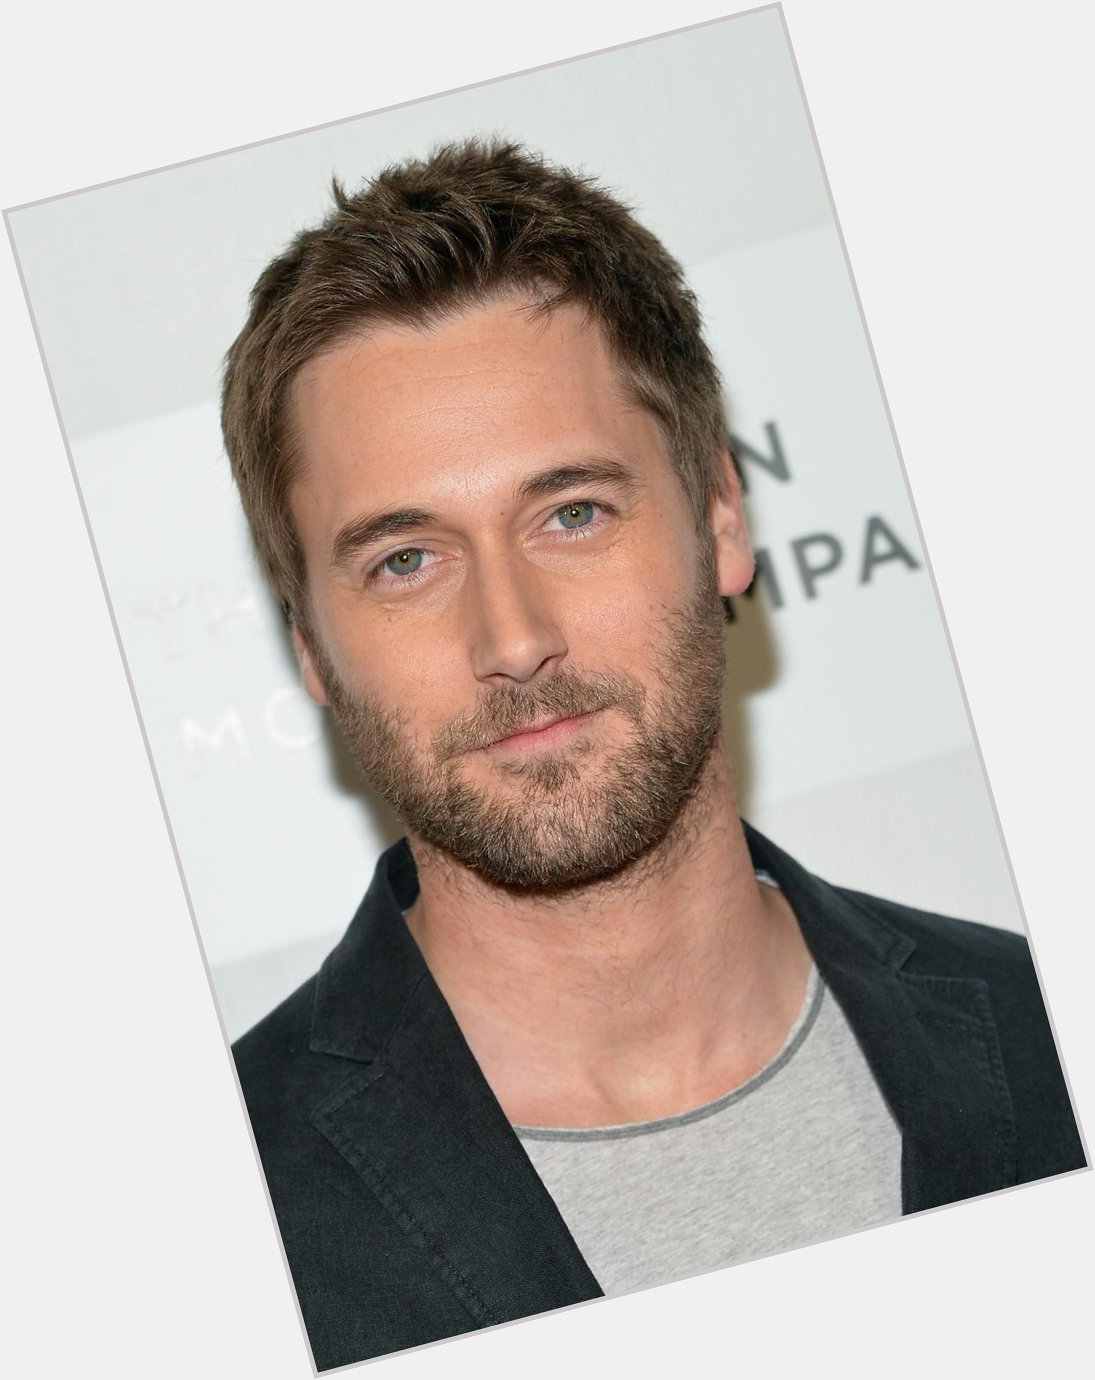 Wishing Ryan_Eggold, star of and a very happy birthday! 